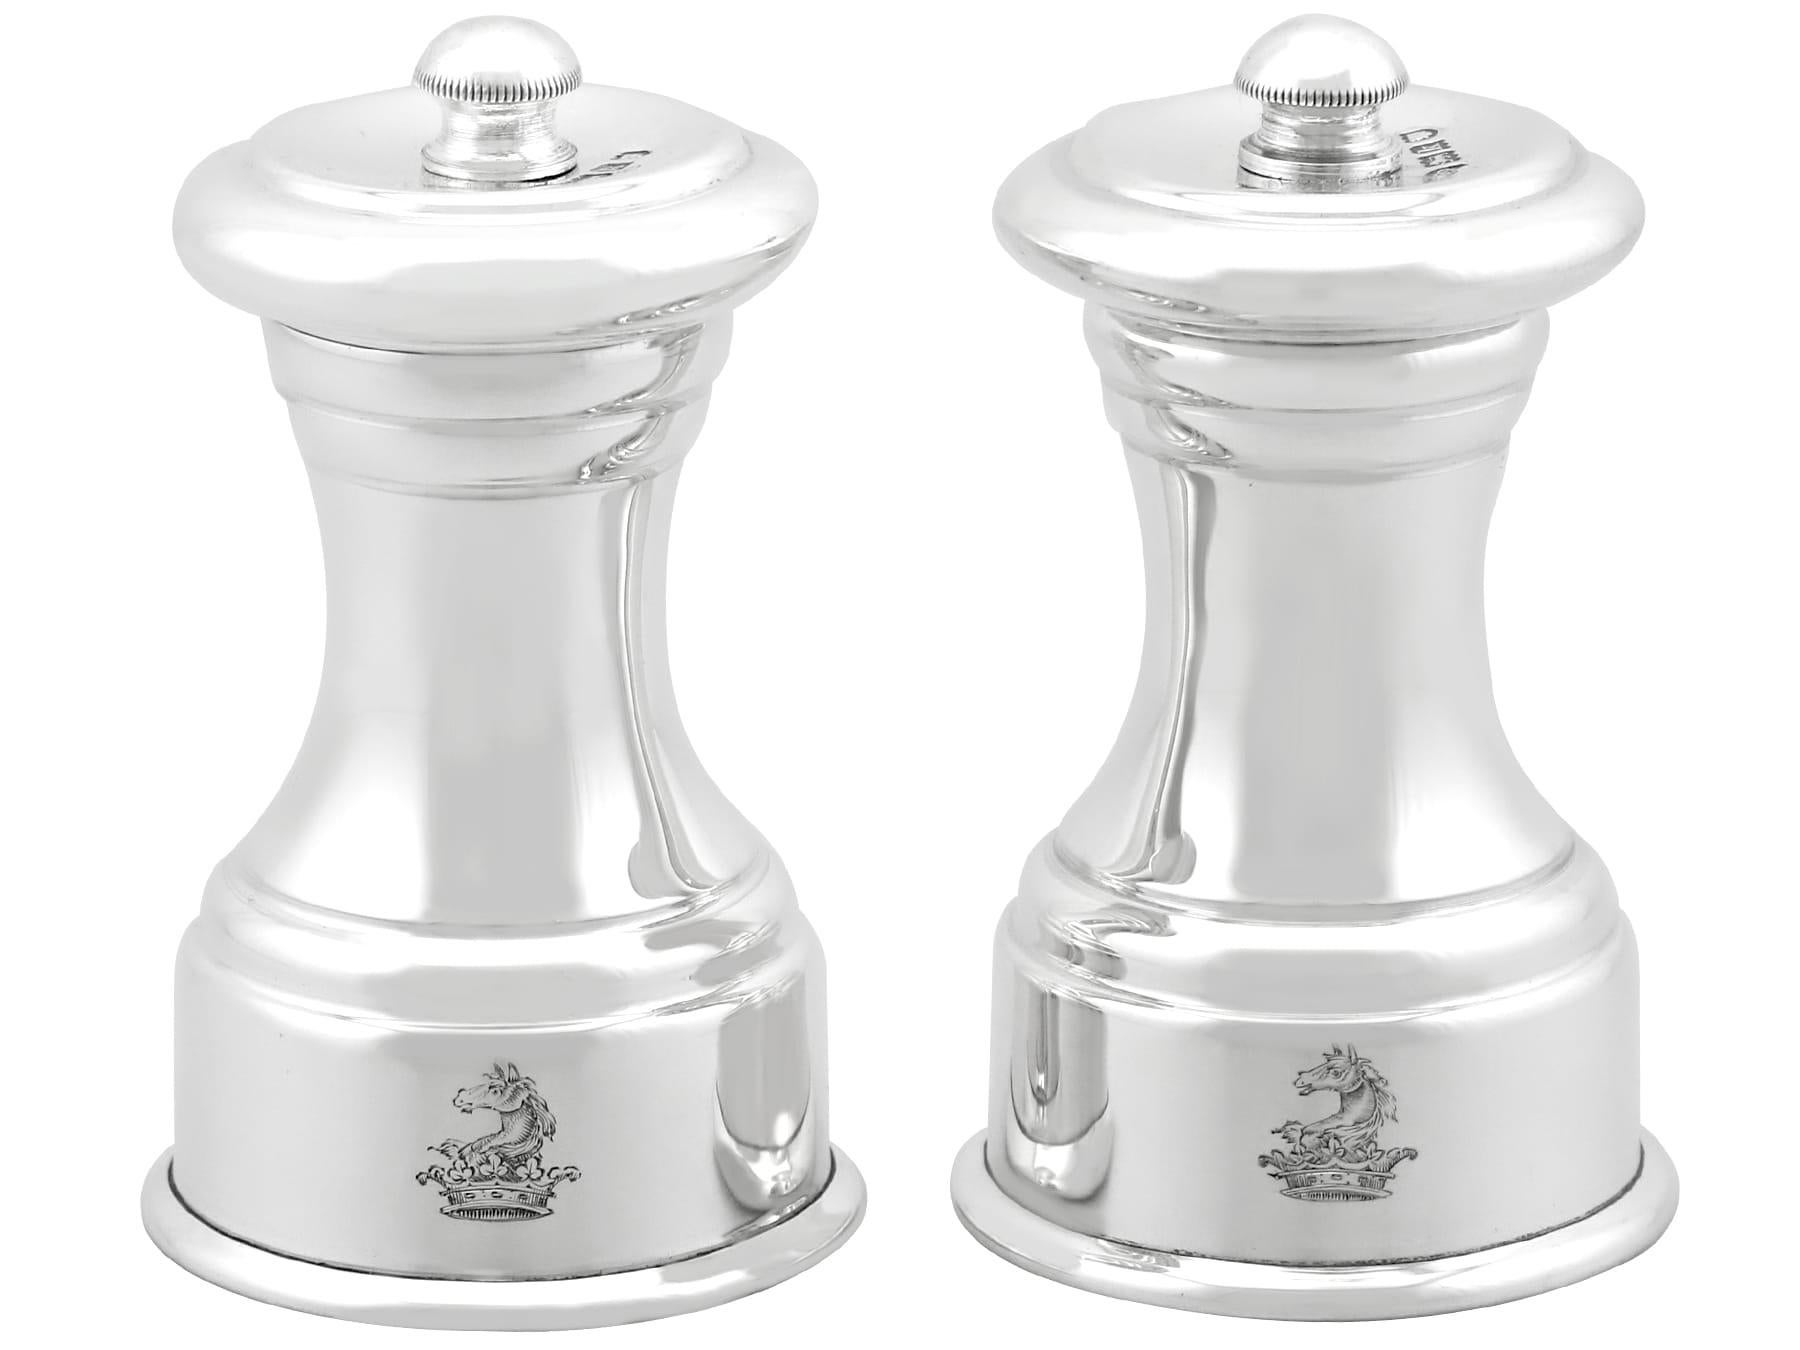 Antique Edwardian Sterling Silver Pepper Grinders (1905) In Excellent Condition For Sale In Jesmond, Newcastle Upon Tyne